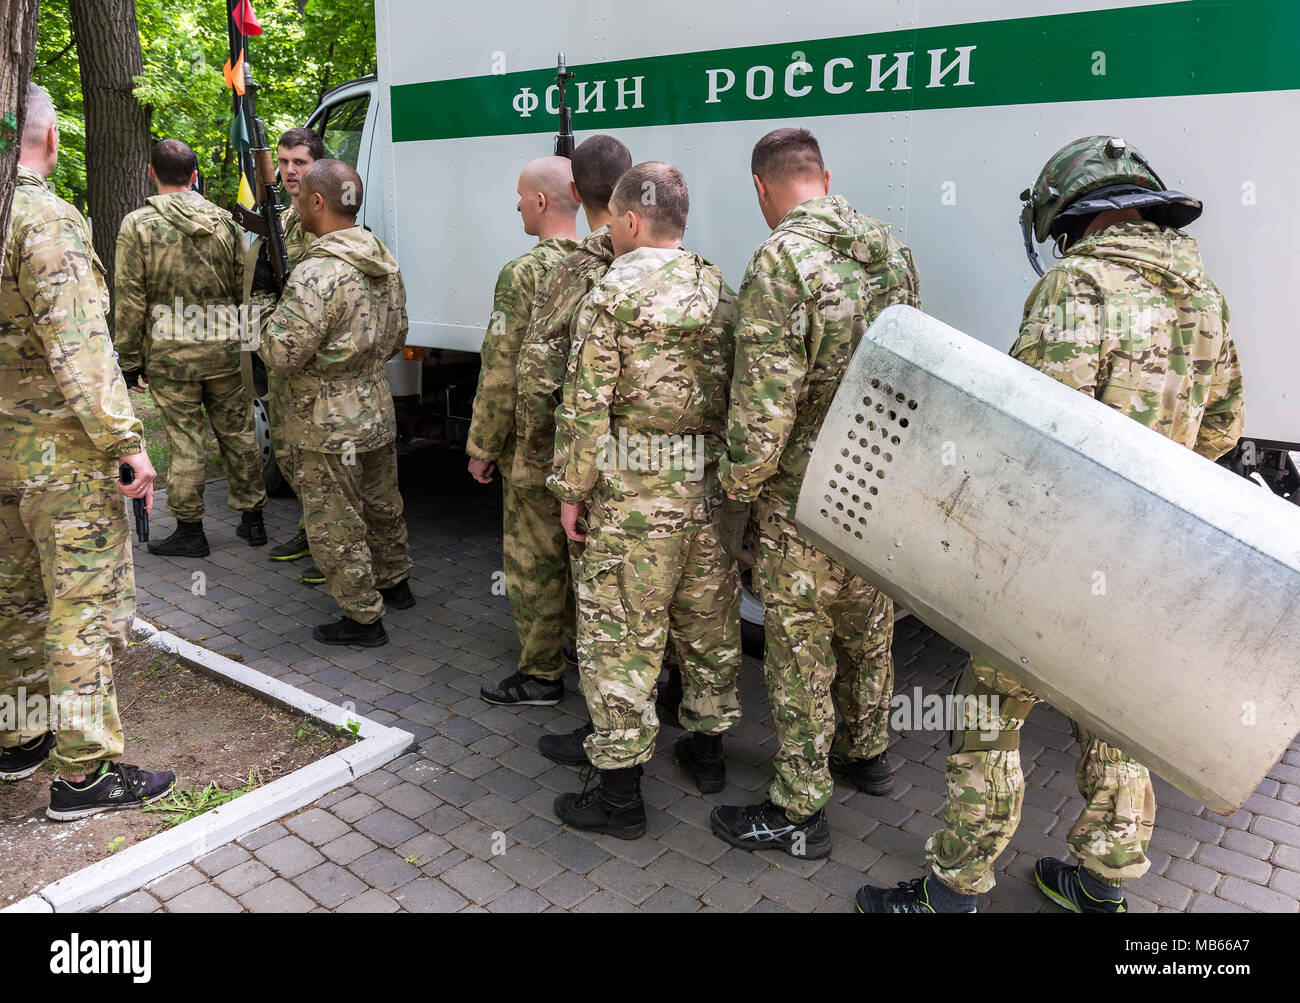 Samara, Russia - May 27, 2017: Special Forces soldiers of Federal Penitentiary Service of the Russian Federation. Text in Russian: FPS of Russia Stock Photo